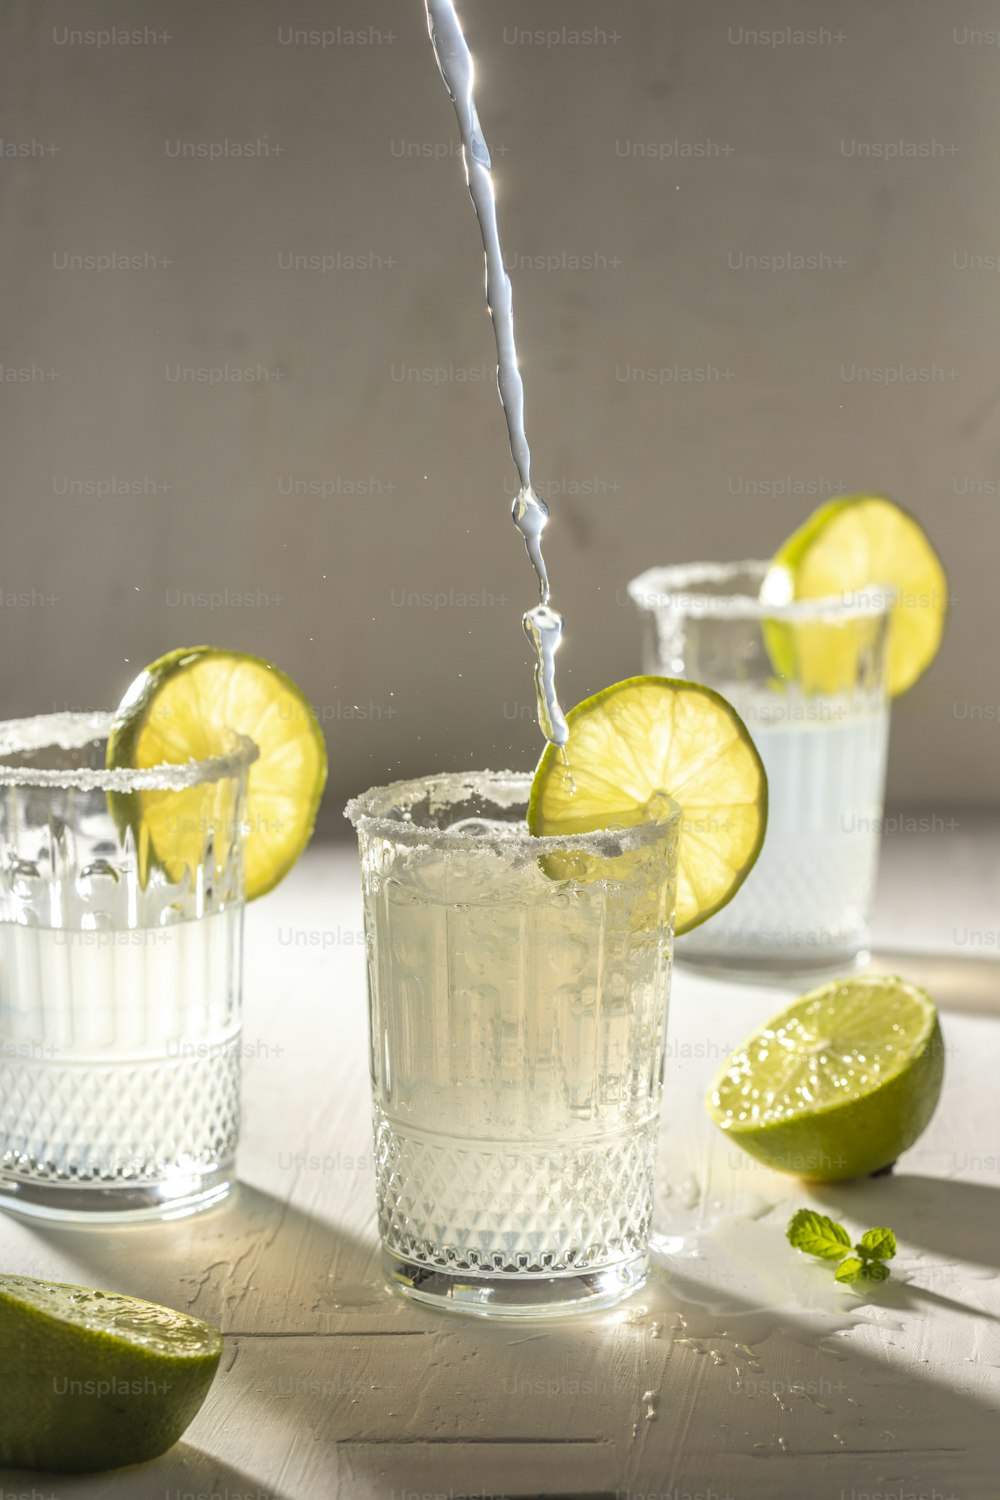 a pitcher of water pouring into a glass filled with ice and limes